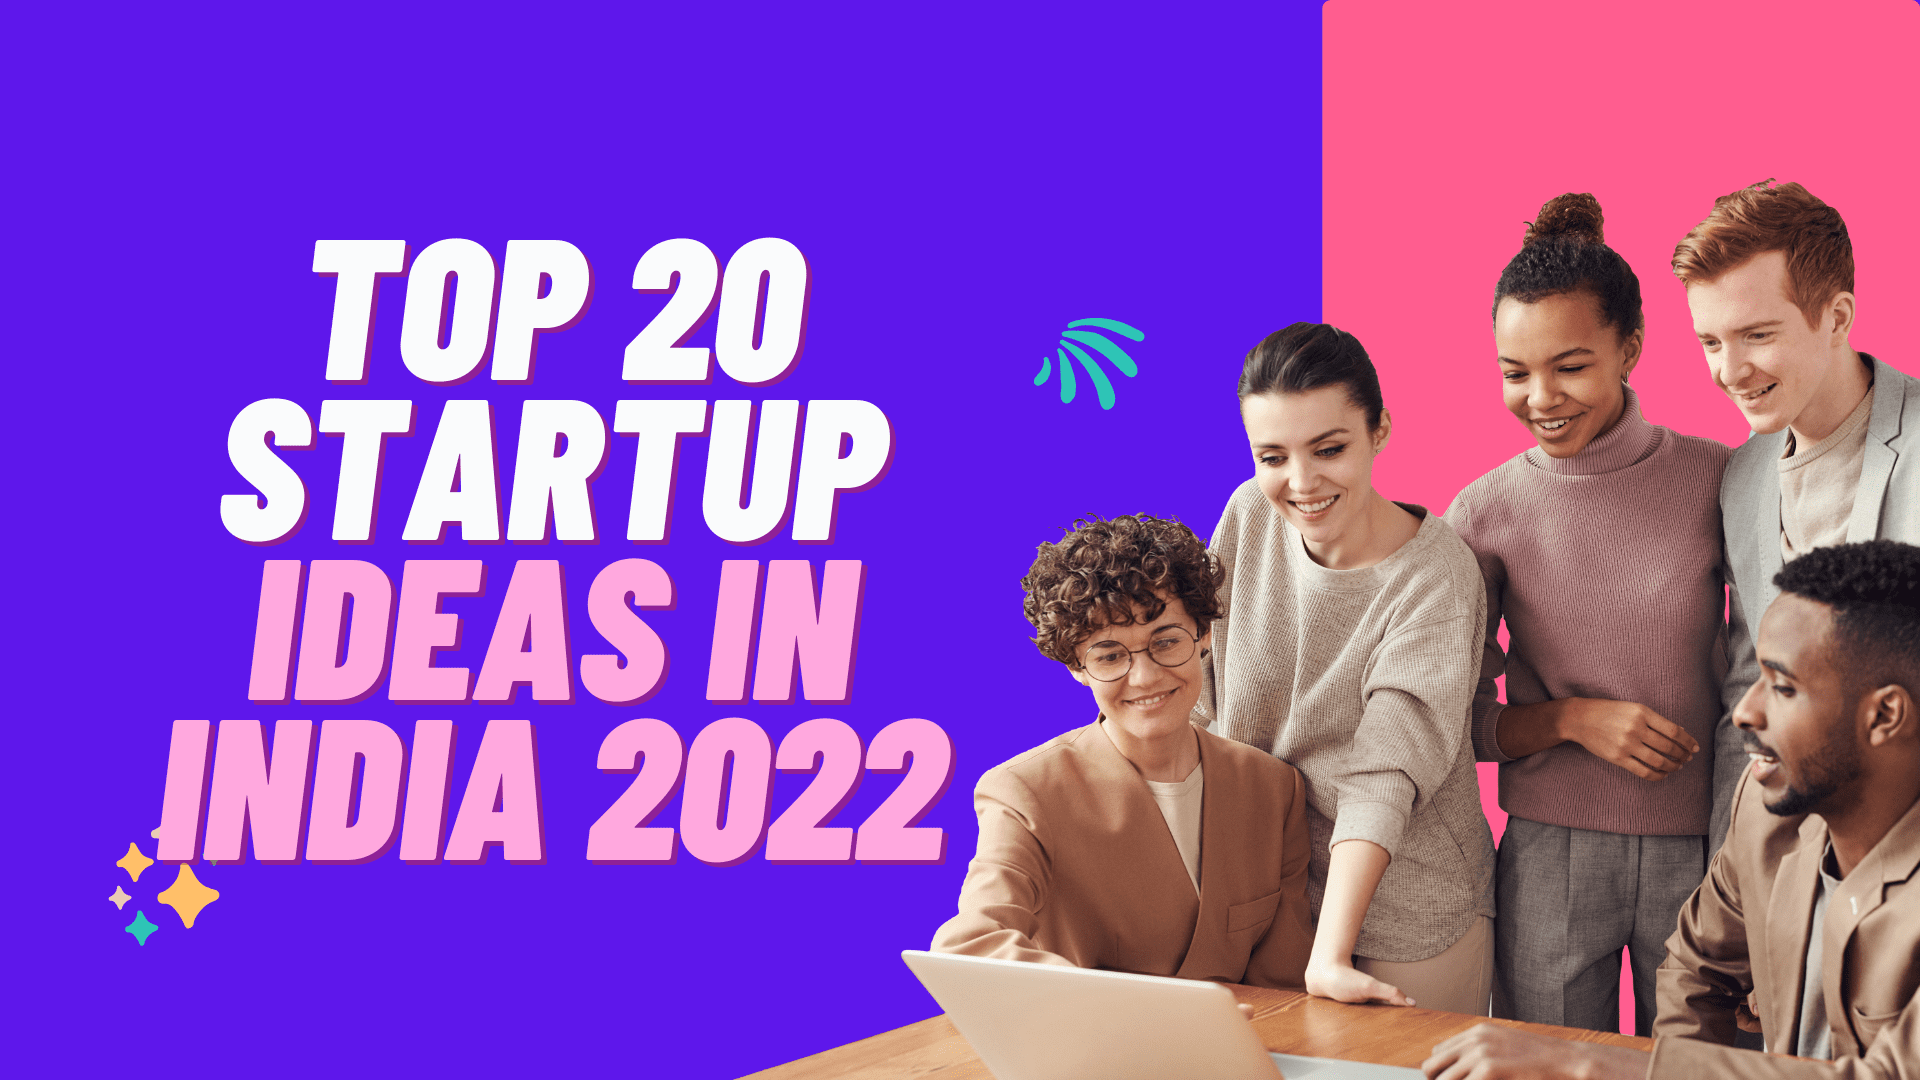 Top 20 Startup Ideas in India